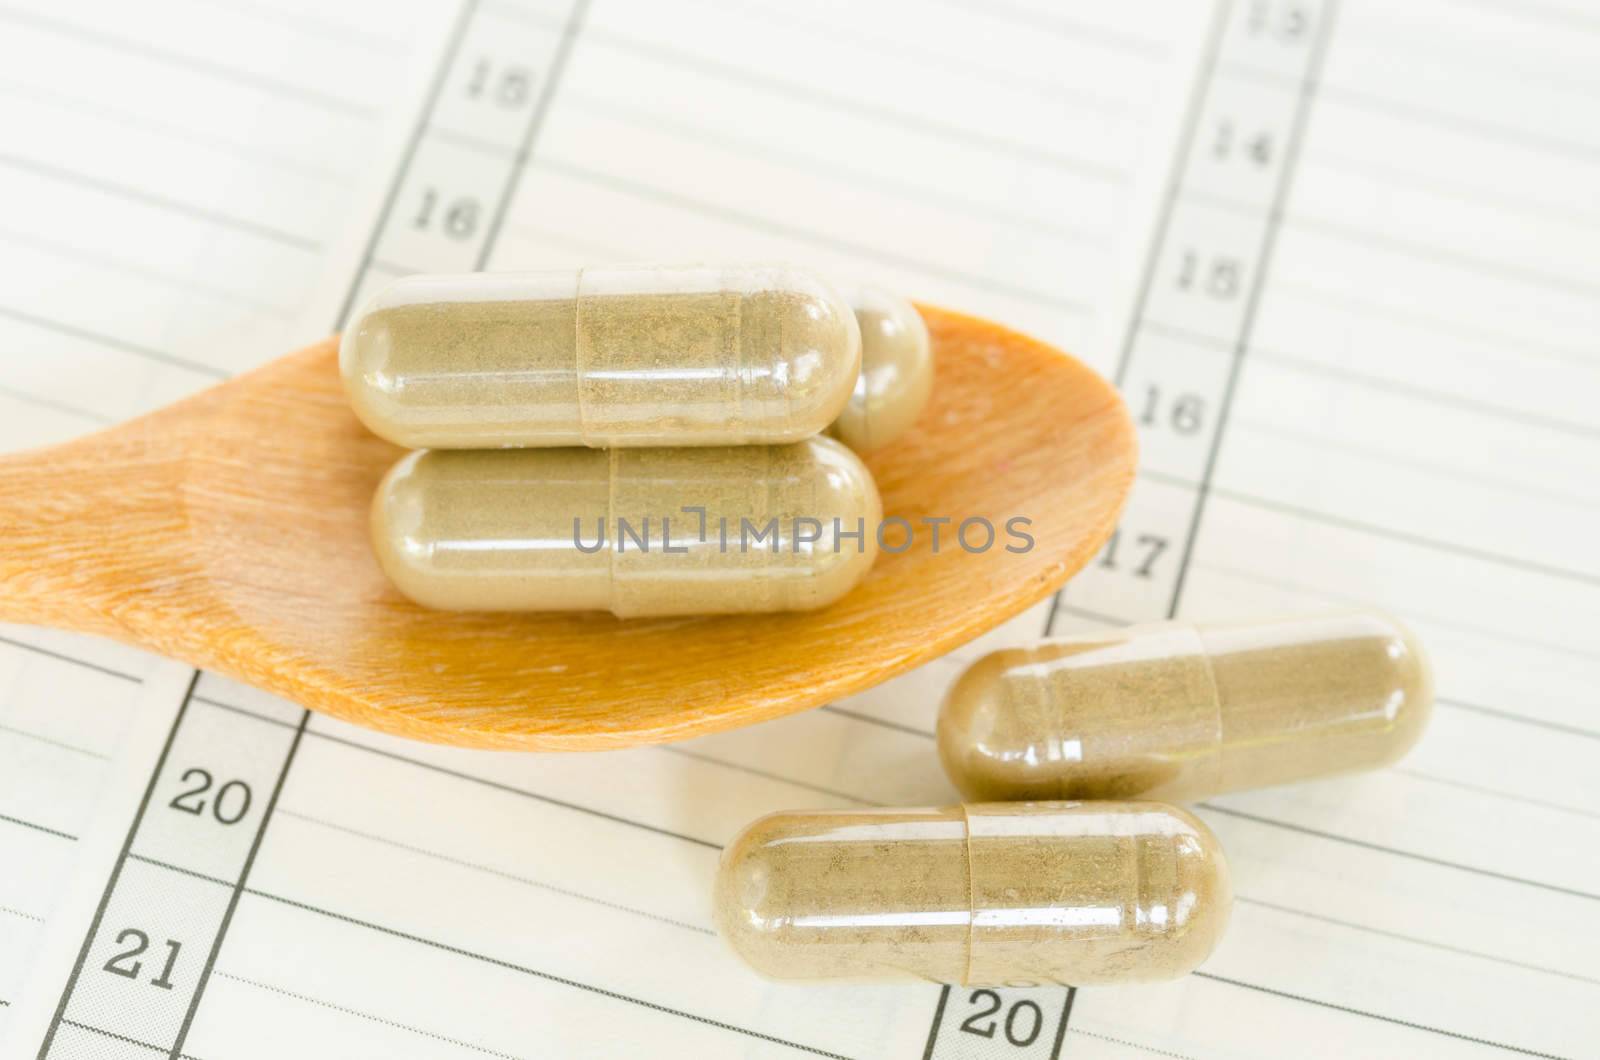 Yellow herb capsule medicine with on diary background.